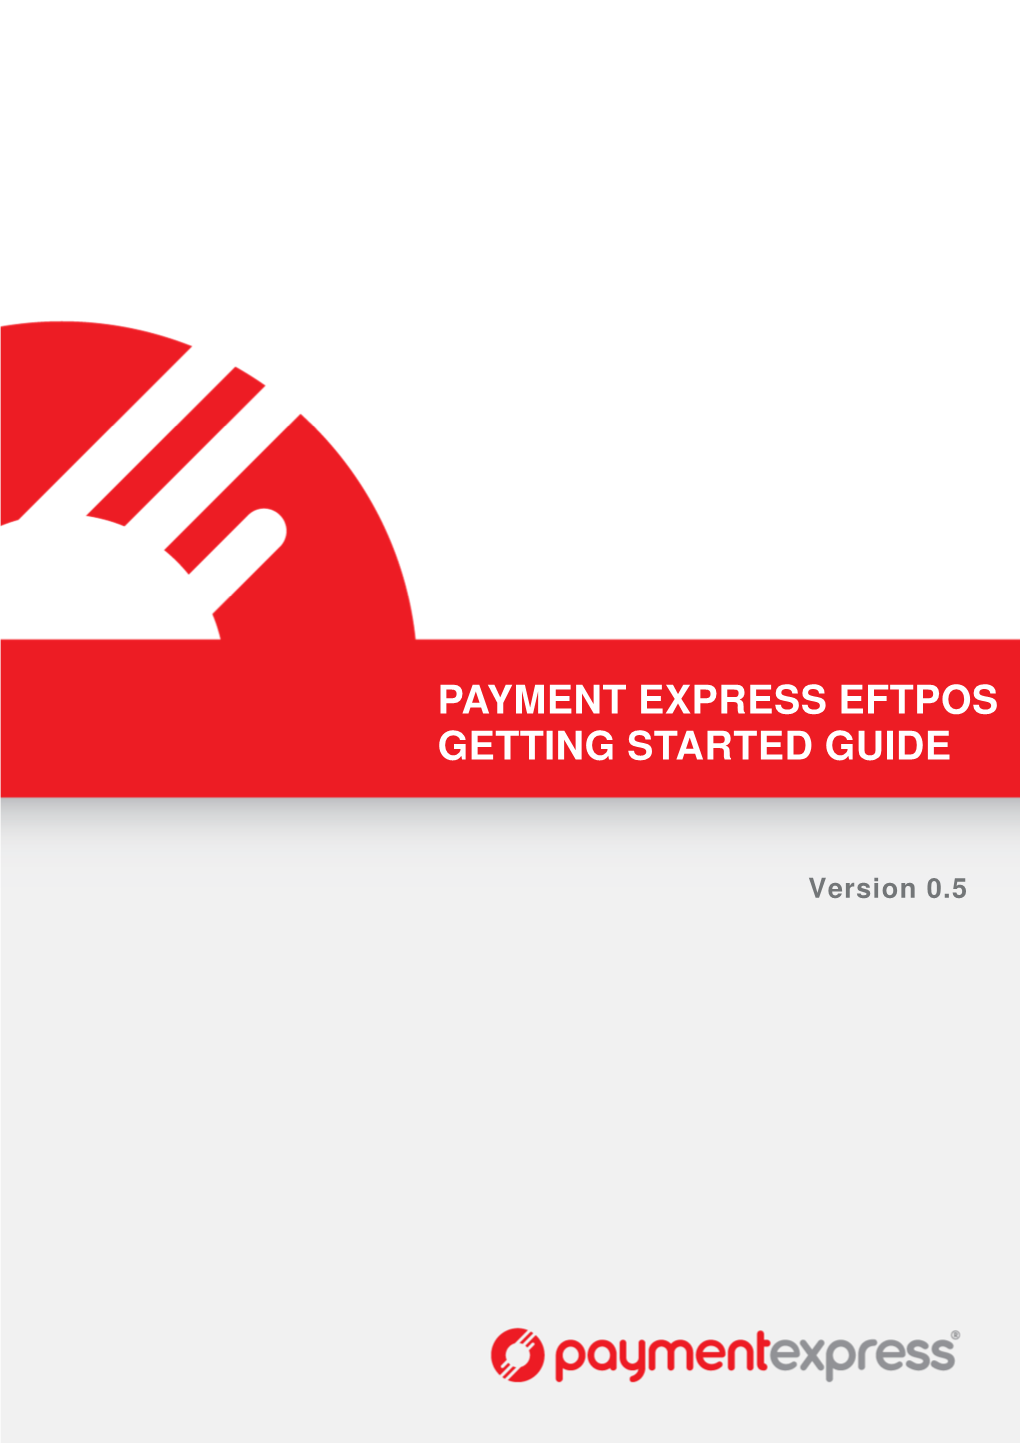 Payment Express Eftpos Getting Started Guide